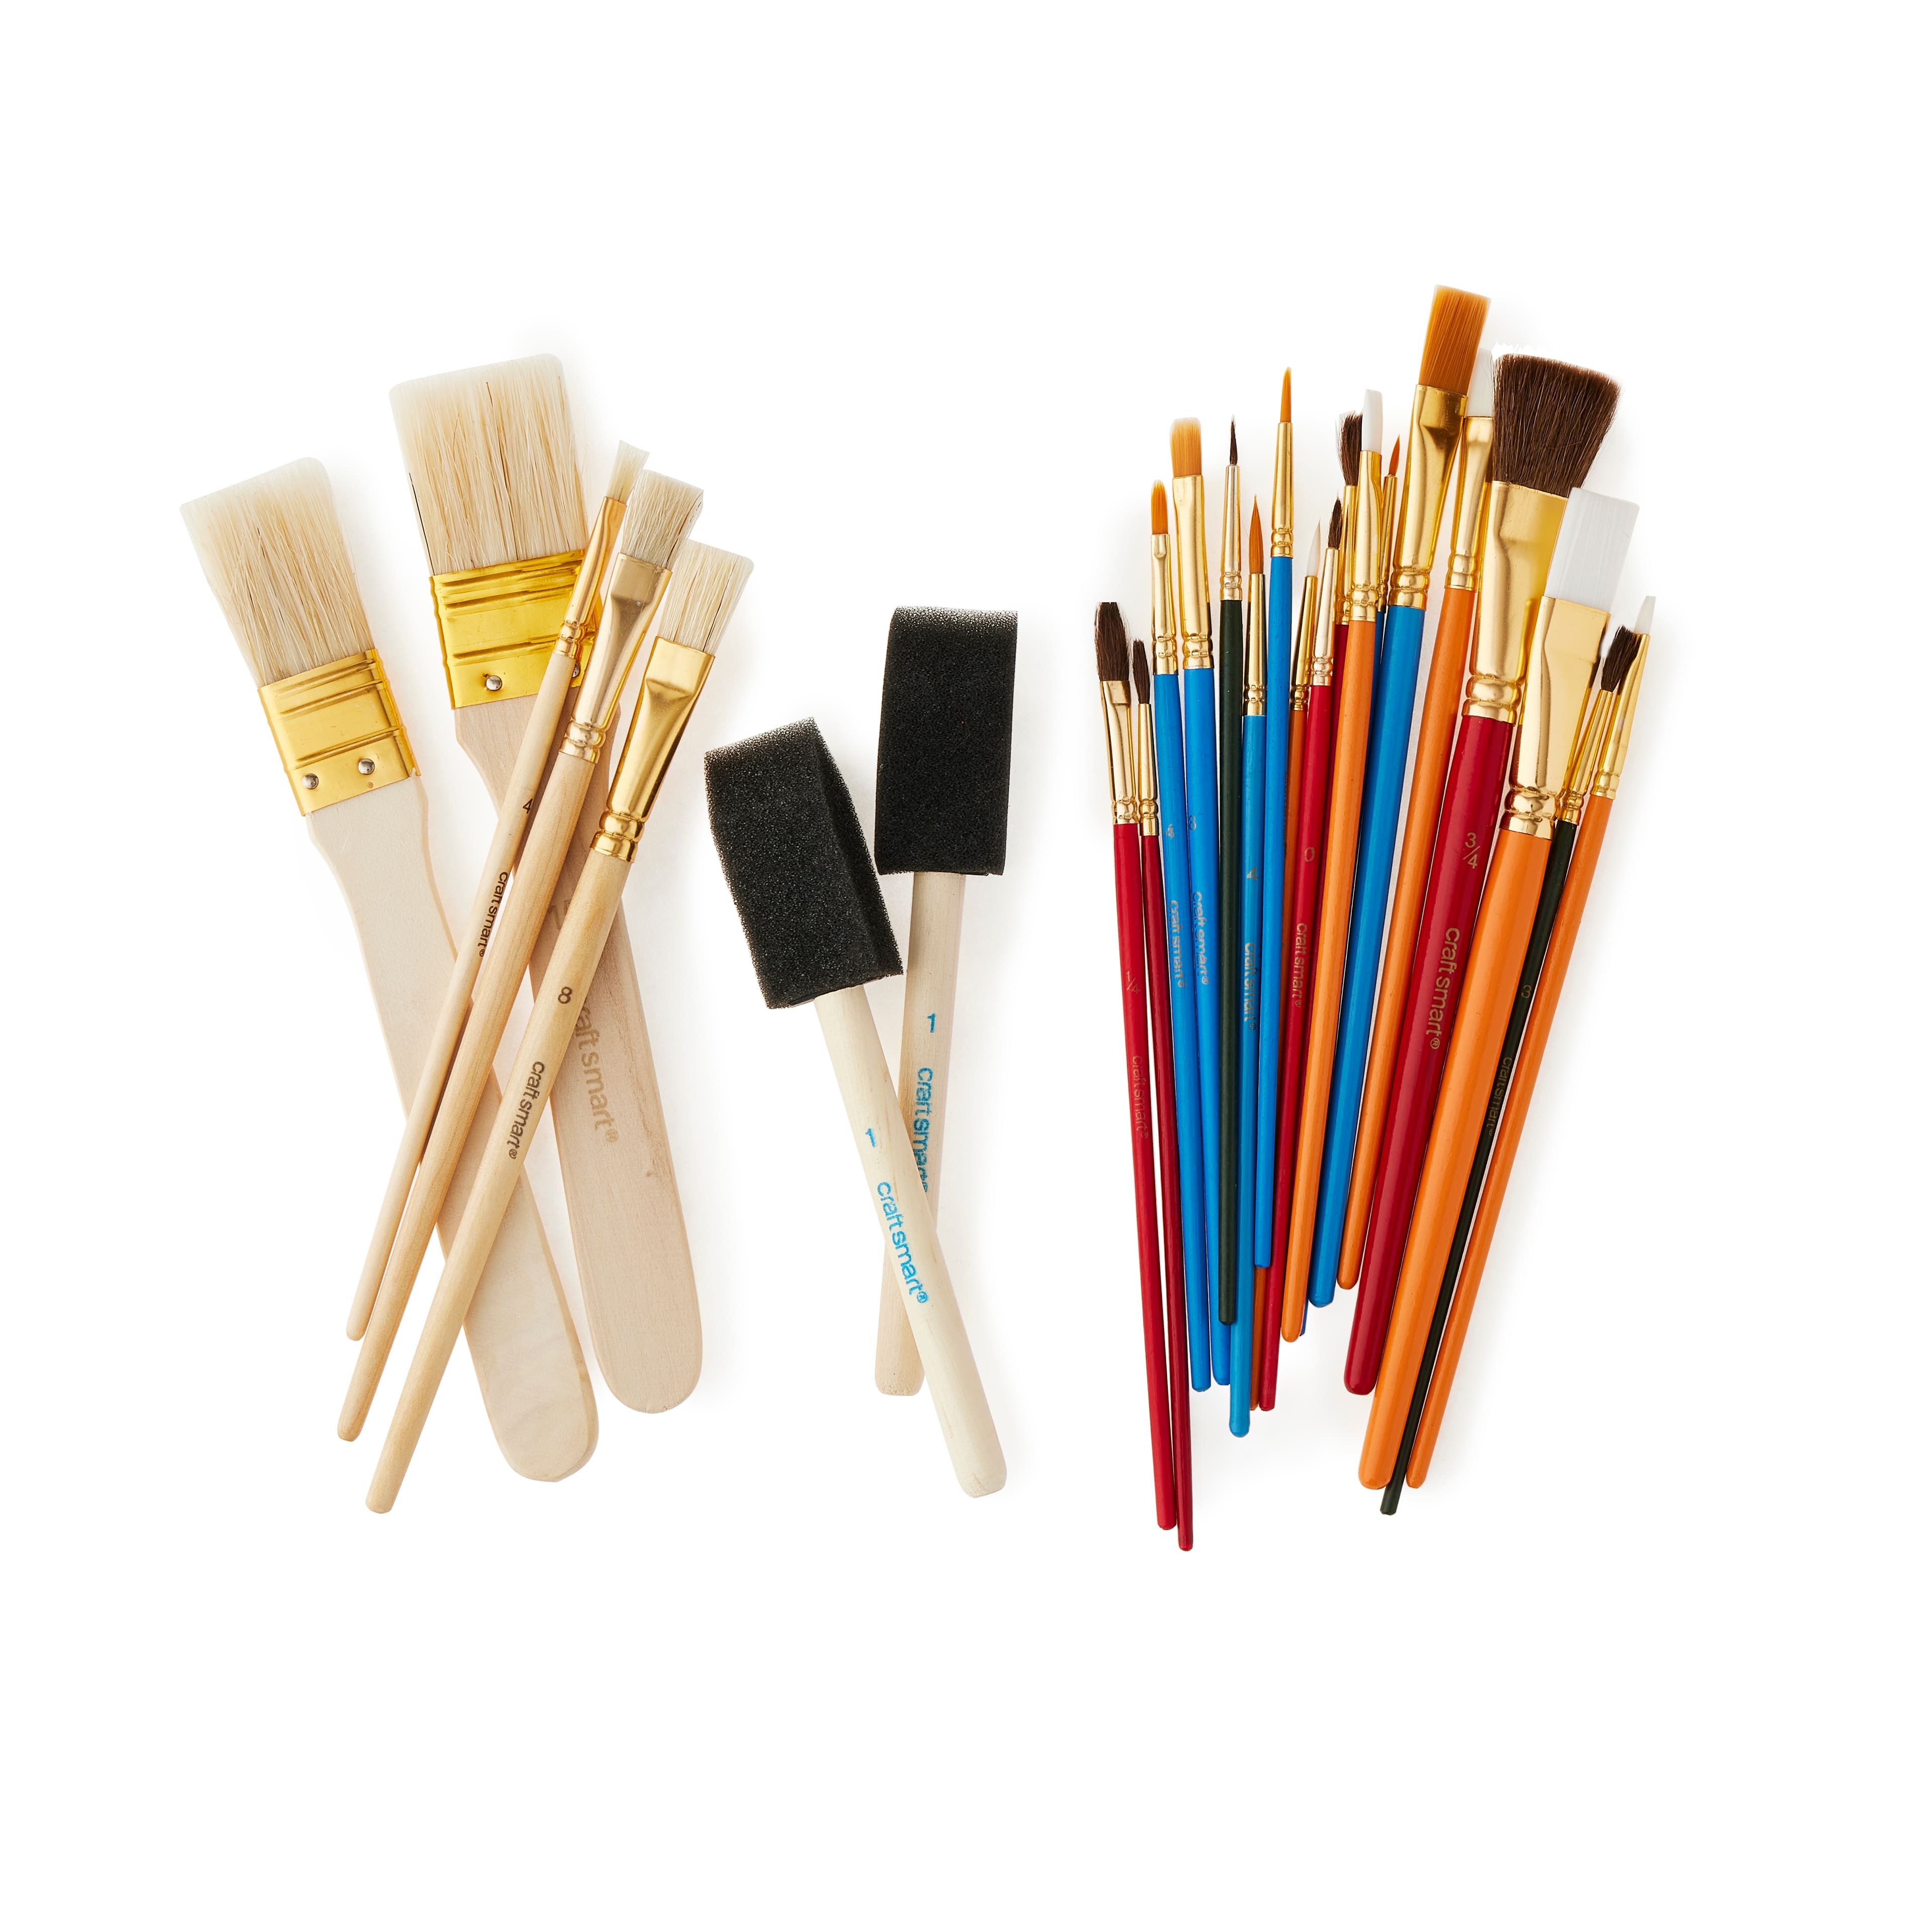 7ct Small Paint Brush Set - Hand Made Modern Brand New Arts and Crafts